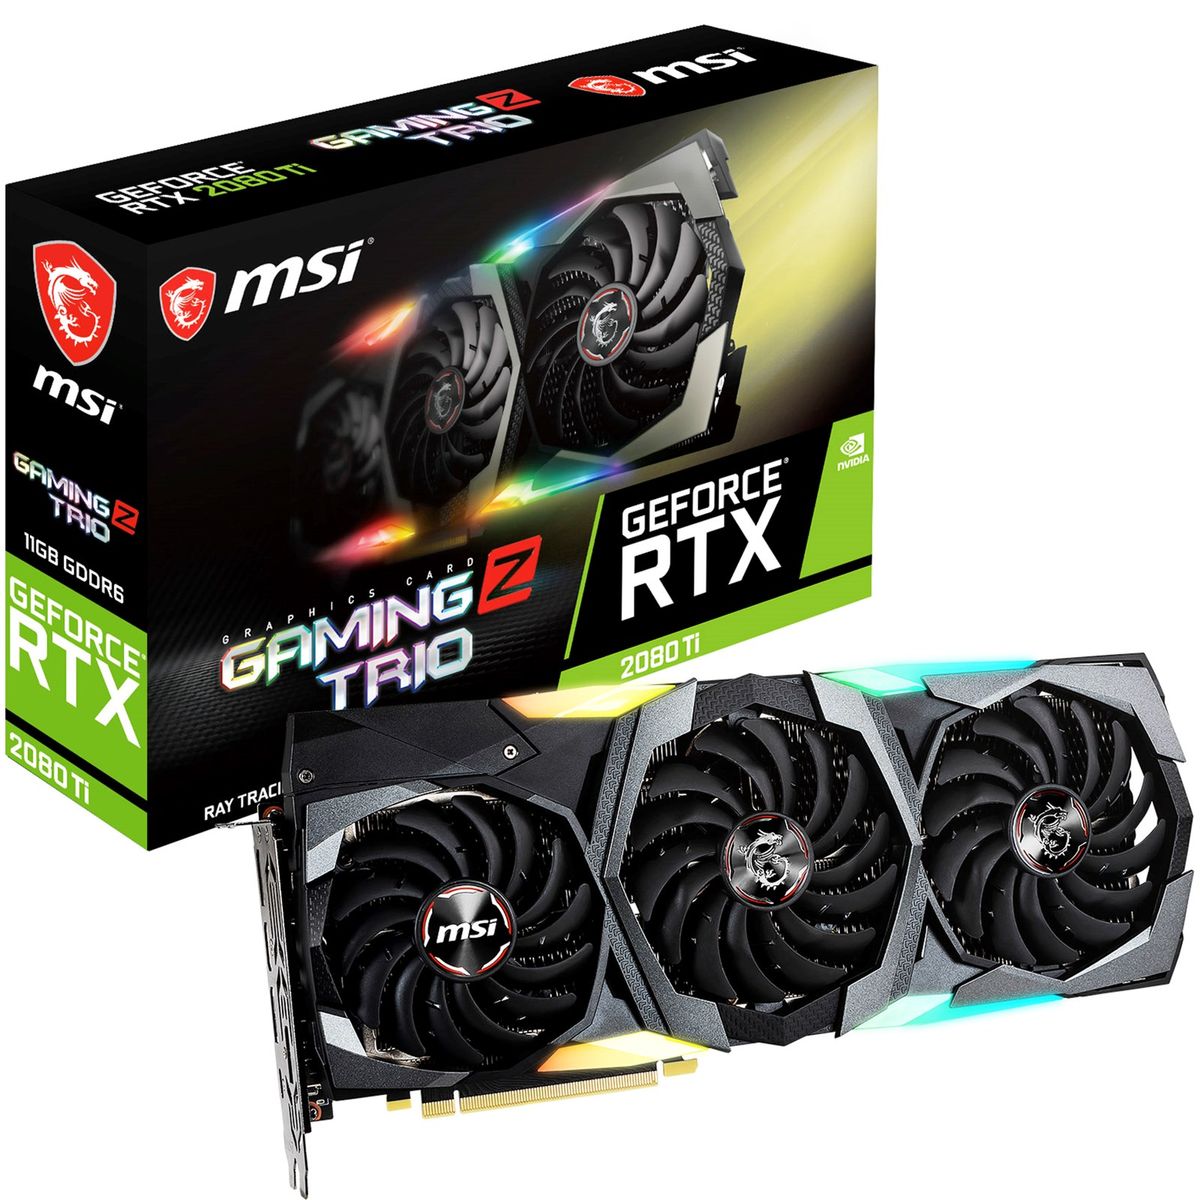 MSI Delivers First GeForce RTX 2080 Ti With 16 Gbps GDDR6 Memory